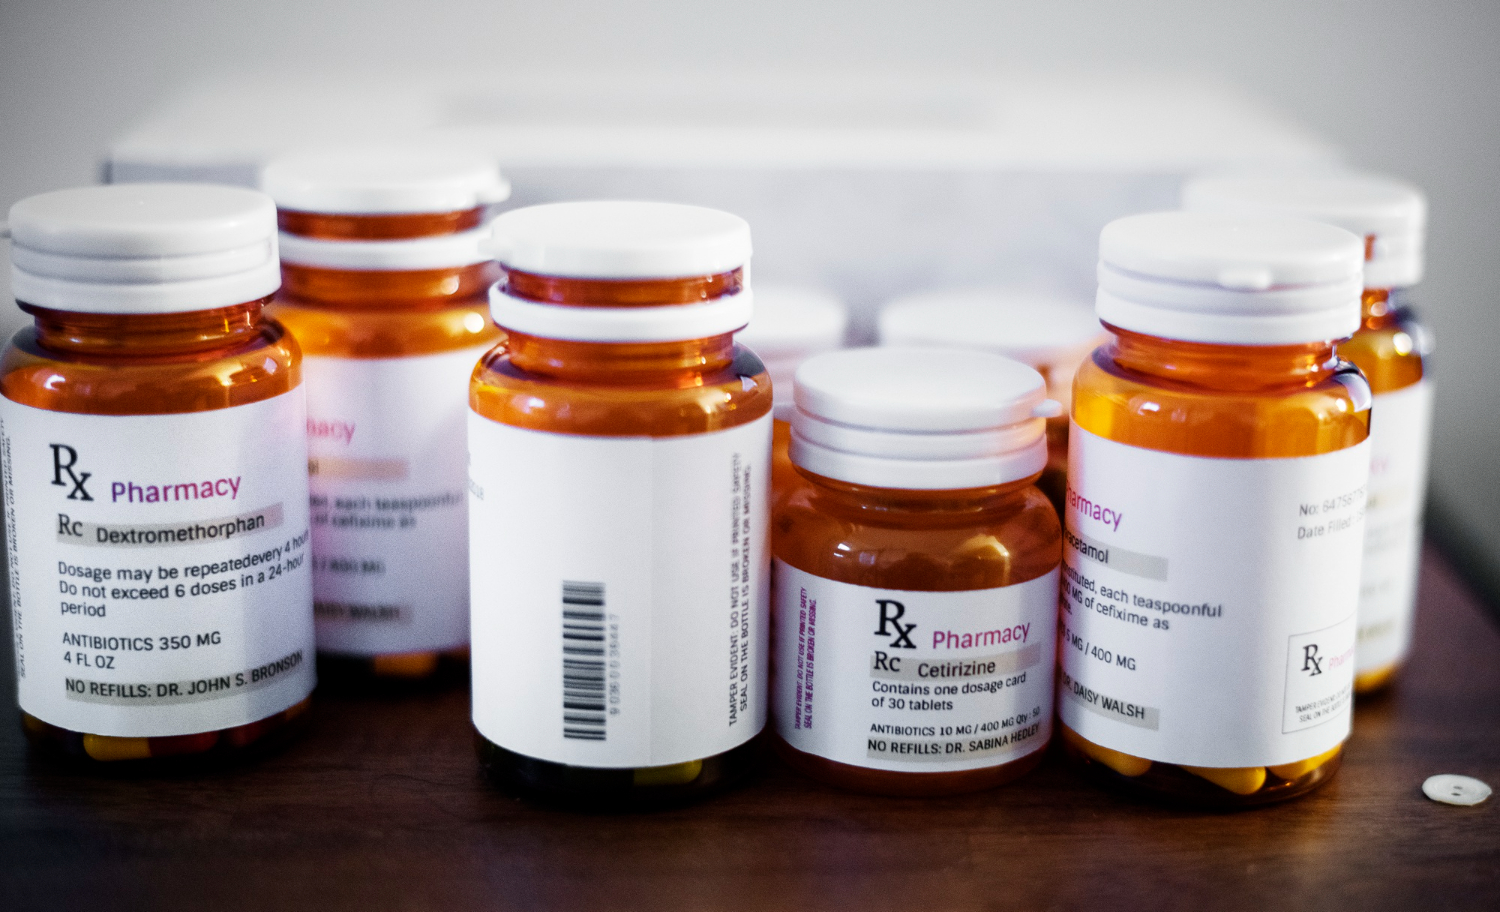 Clear brown prescription bottles with white caps and white labels, containing the name of the medication and dosage information.